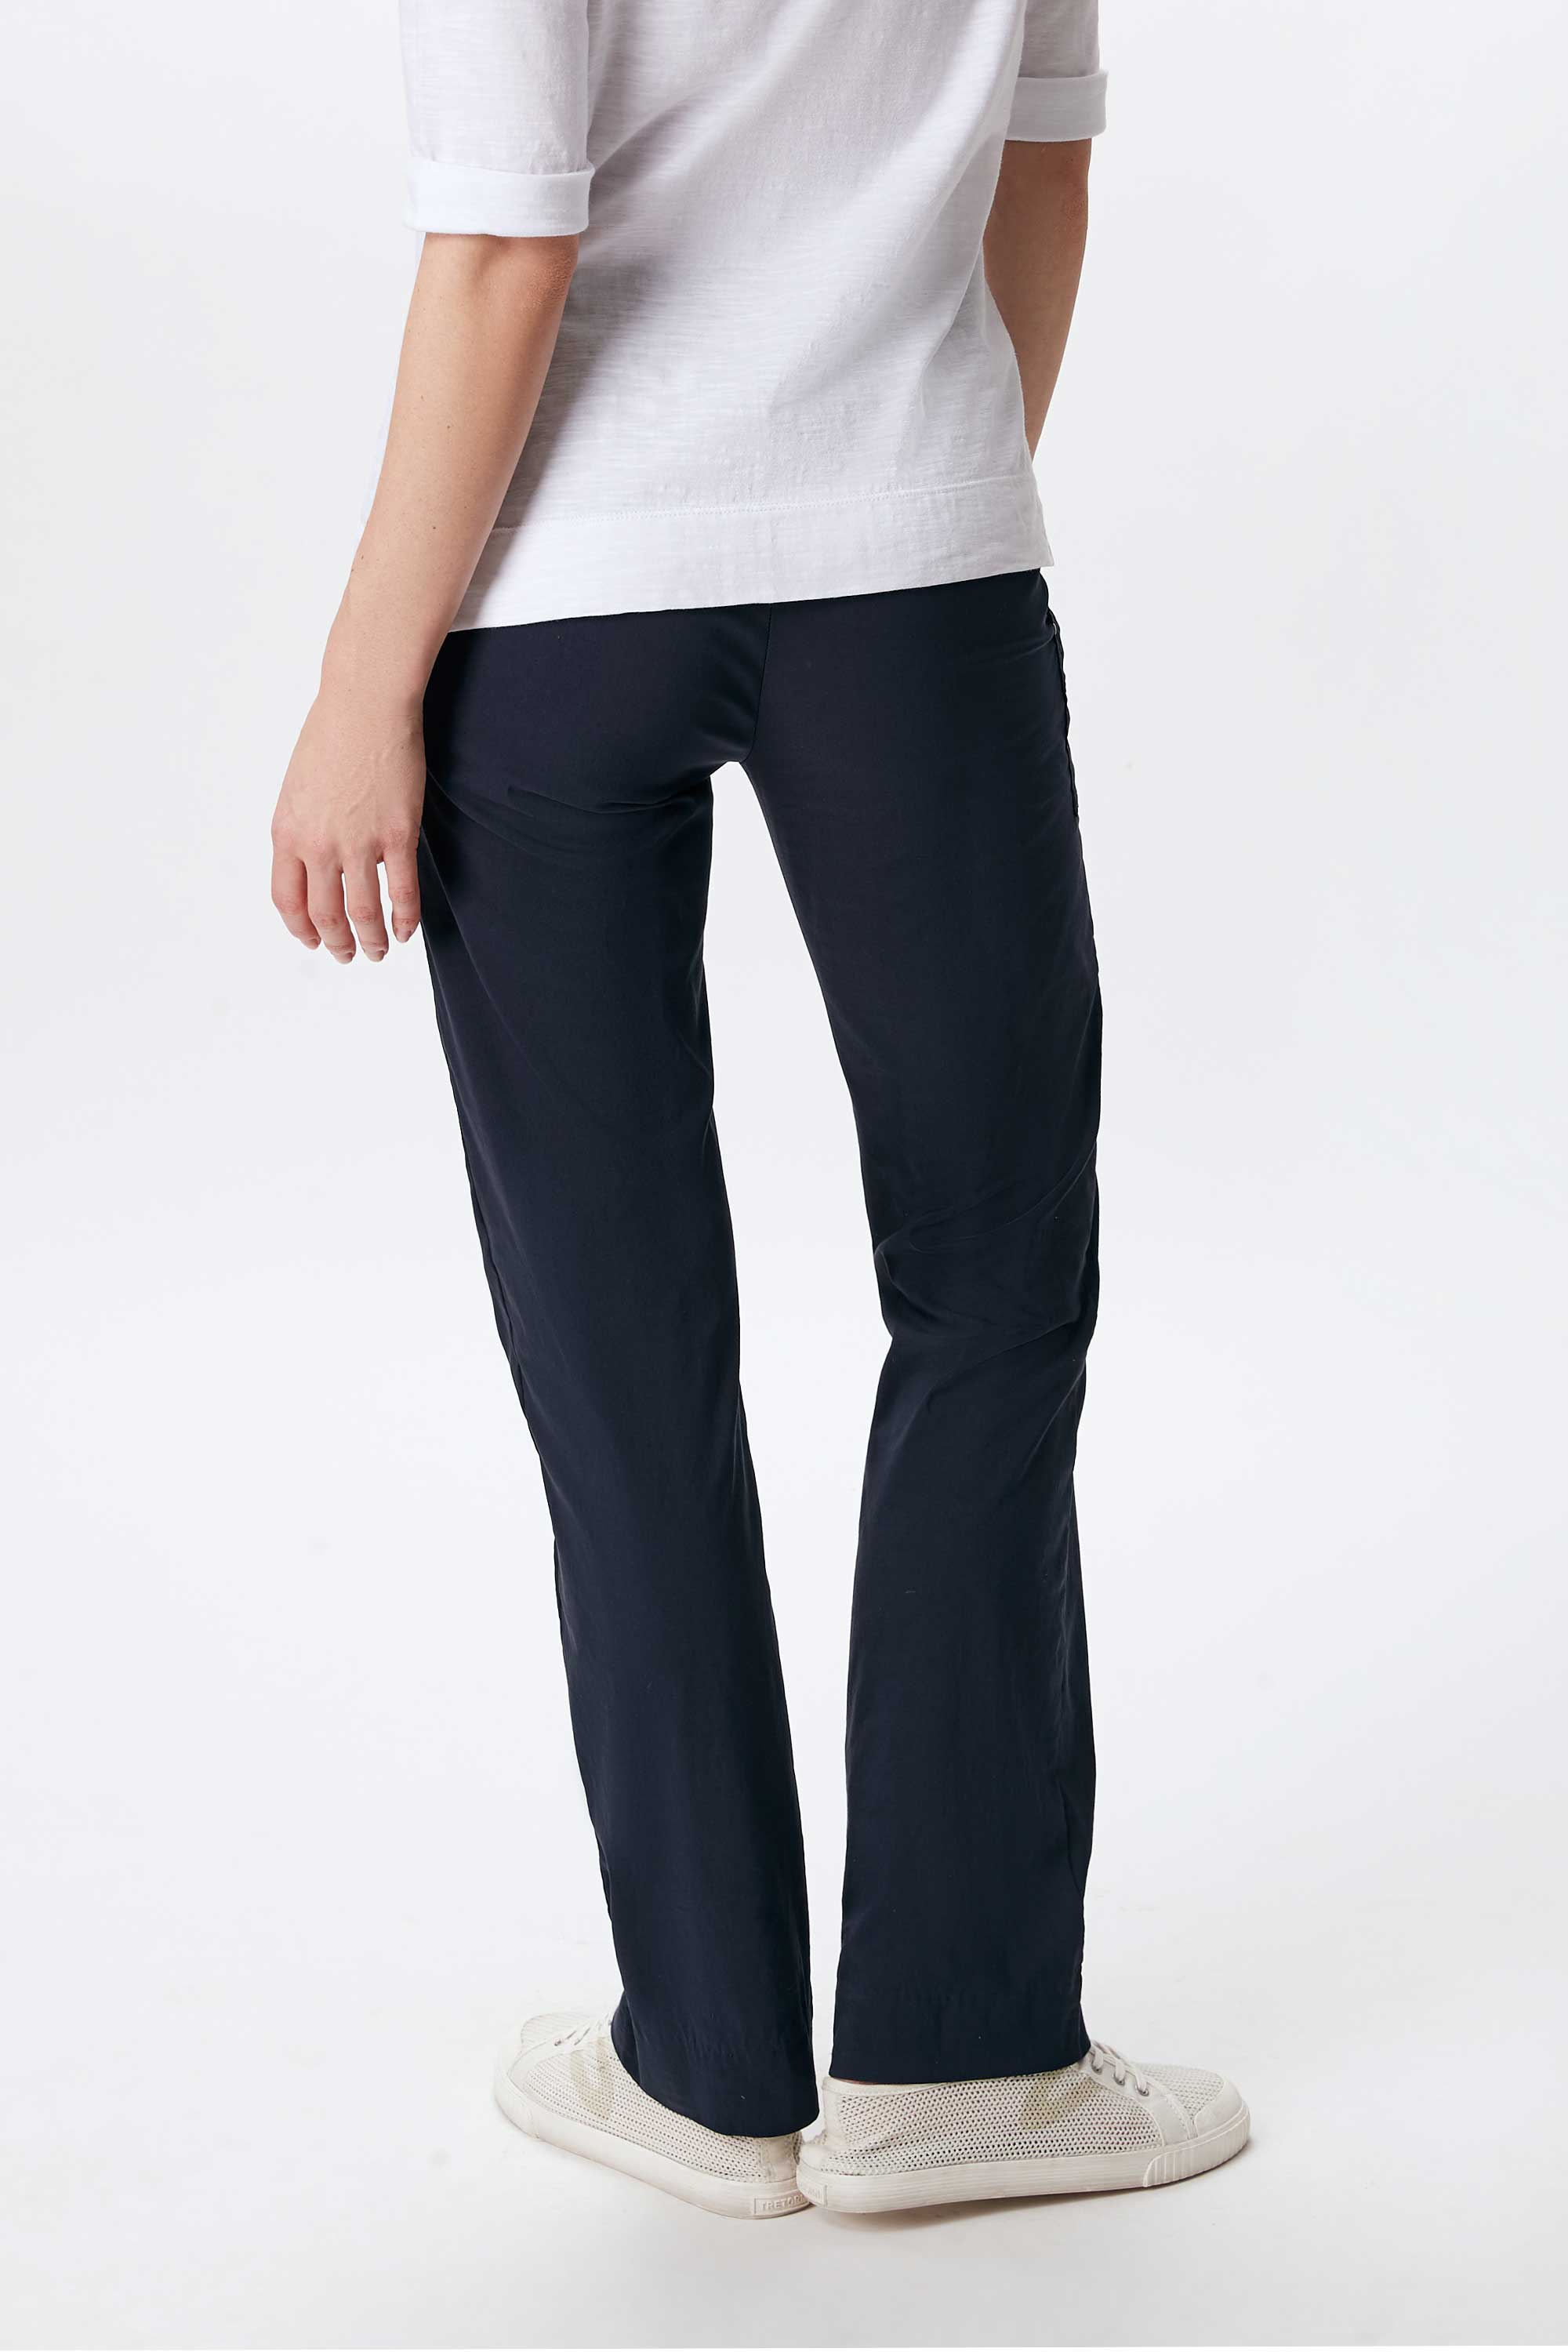 Verge Acrobat Classic Pant - French Ink